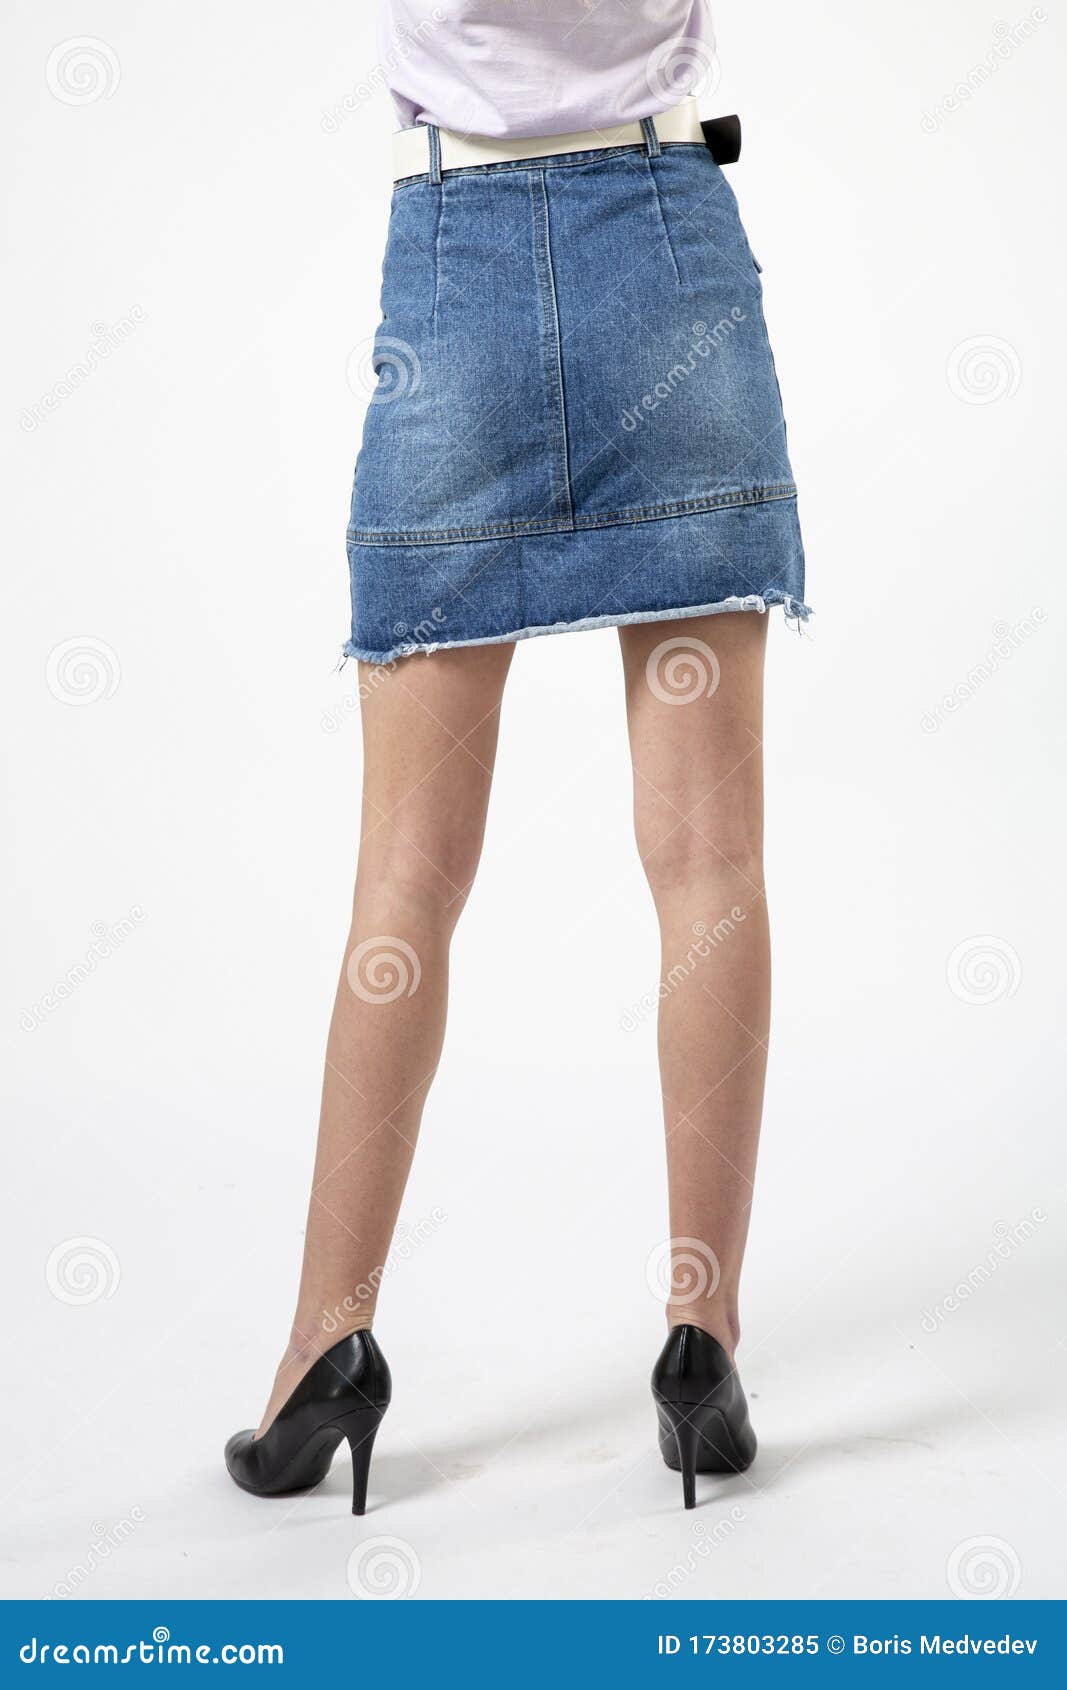 Girl in a Denim Short Skirt and High Heels Stock Image - Image of long ...